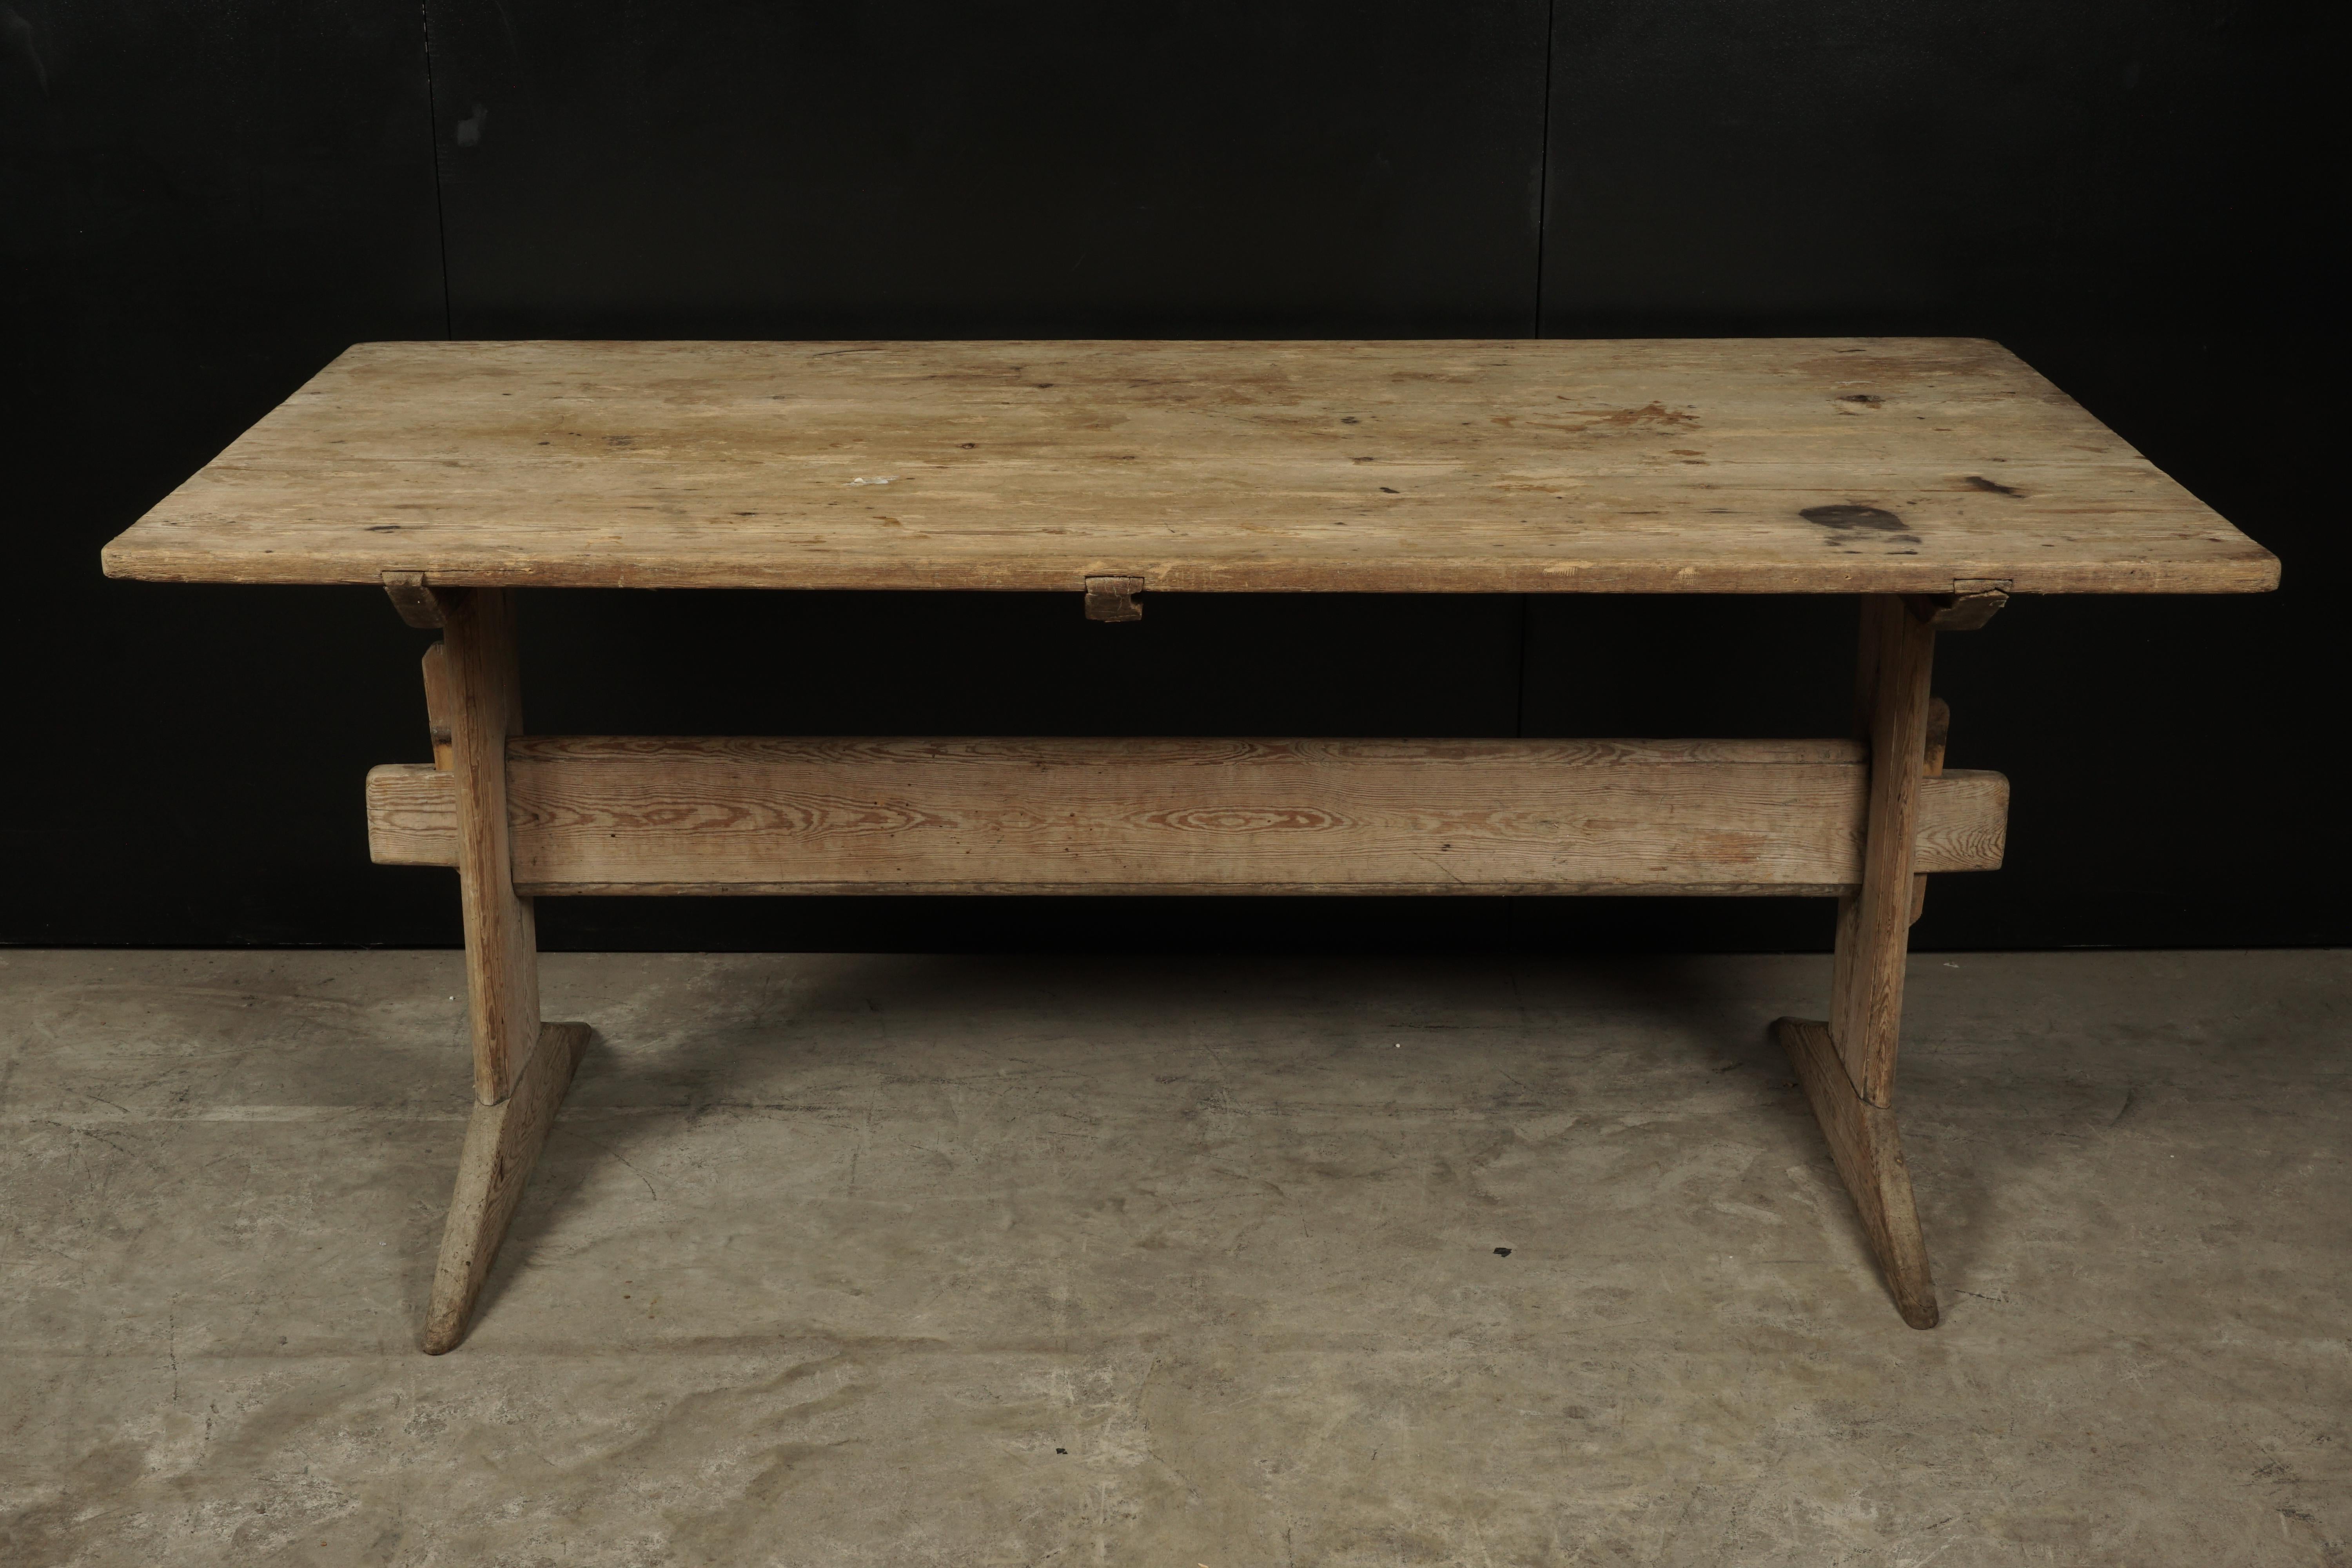 19th century Swedish dining table in pine, circa 1850. Fantastic patina and wear.